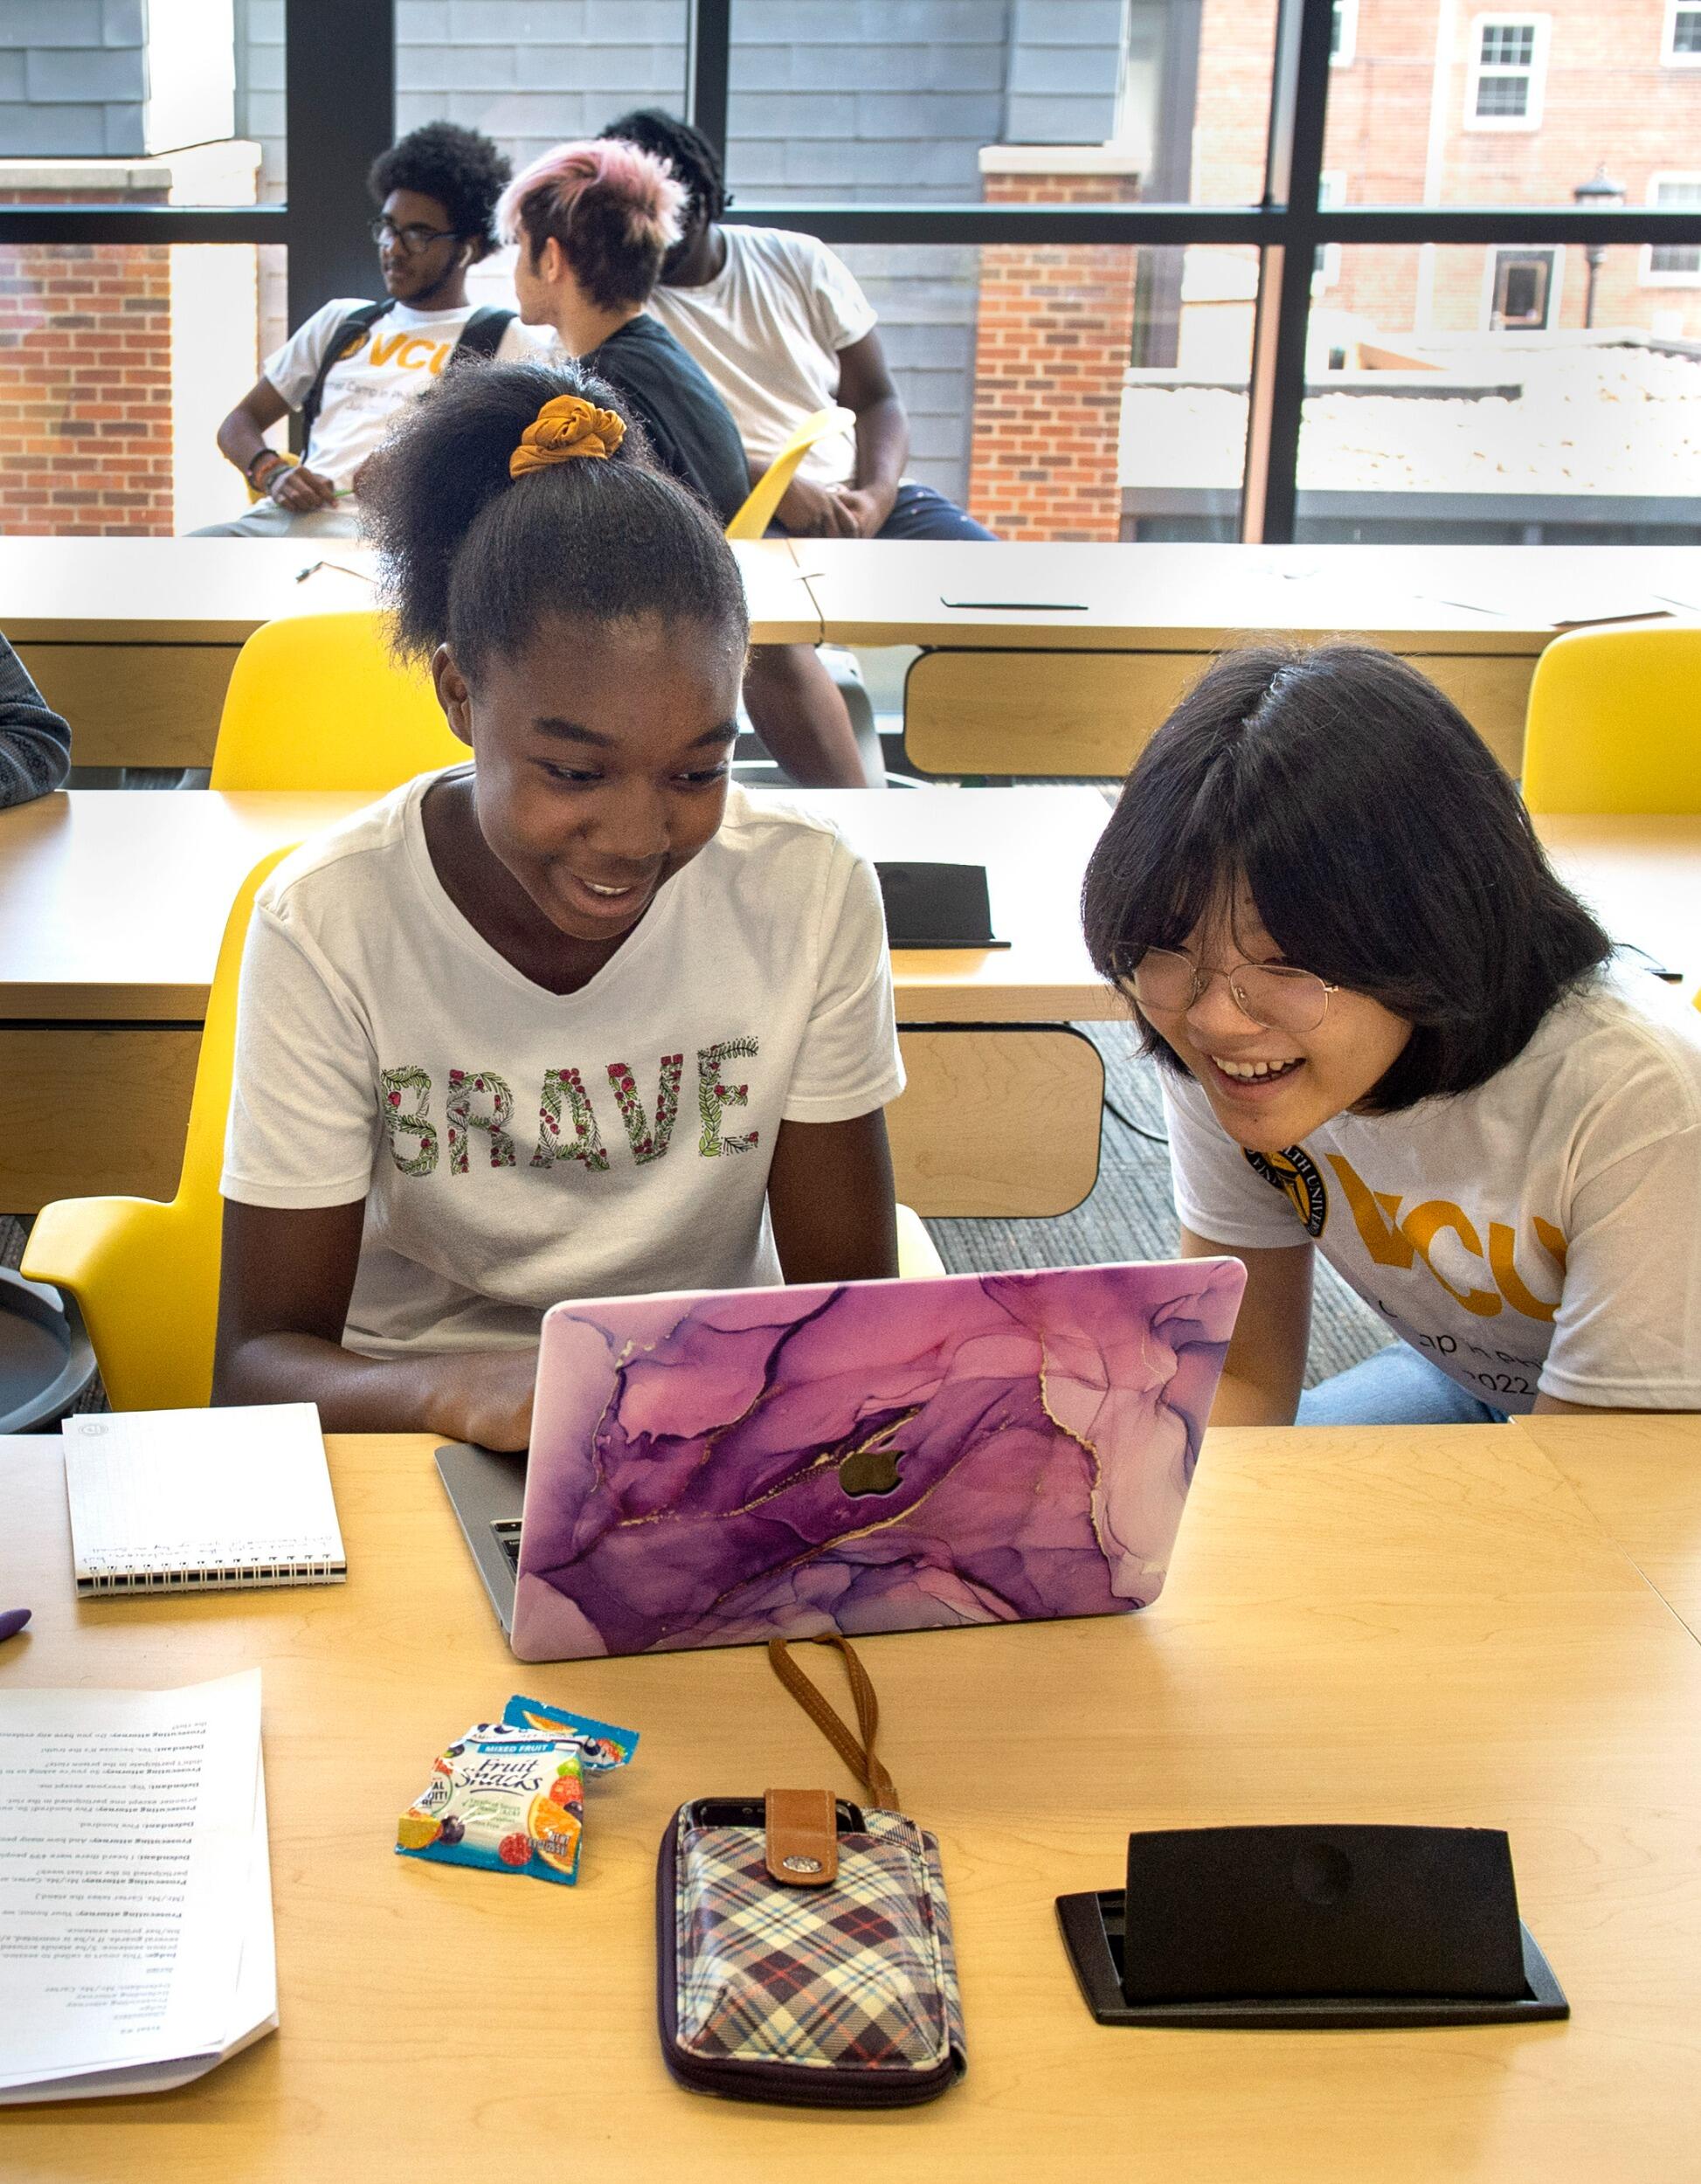 Rita, left, and Eve, local high school students, smile as they look at the screen of a laptop.